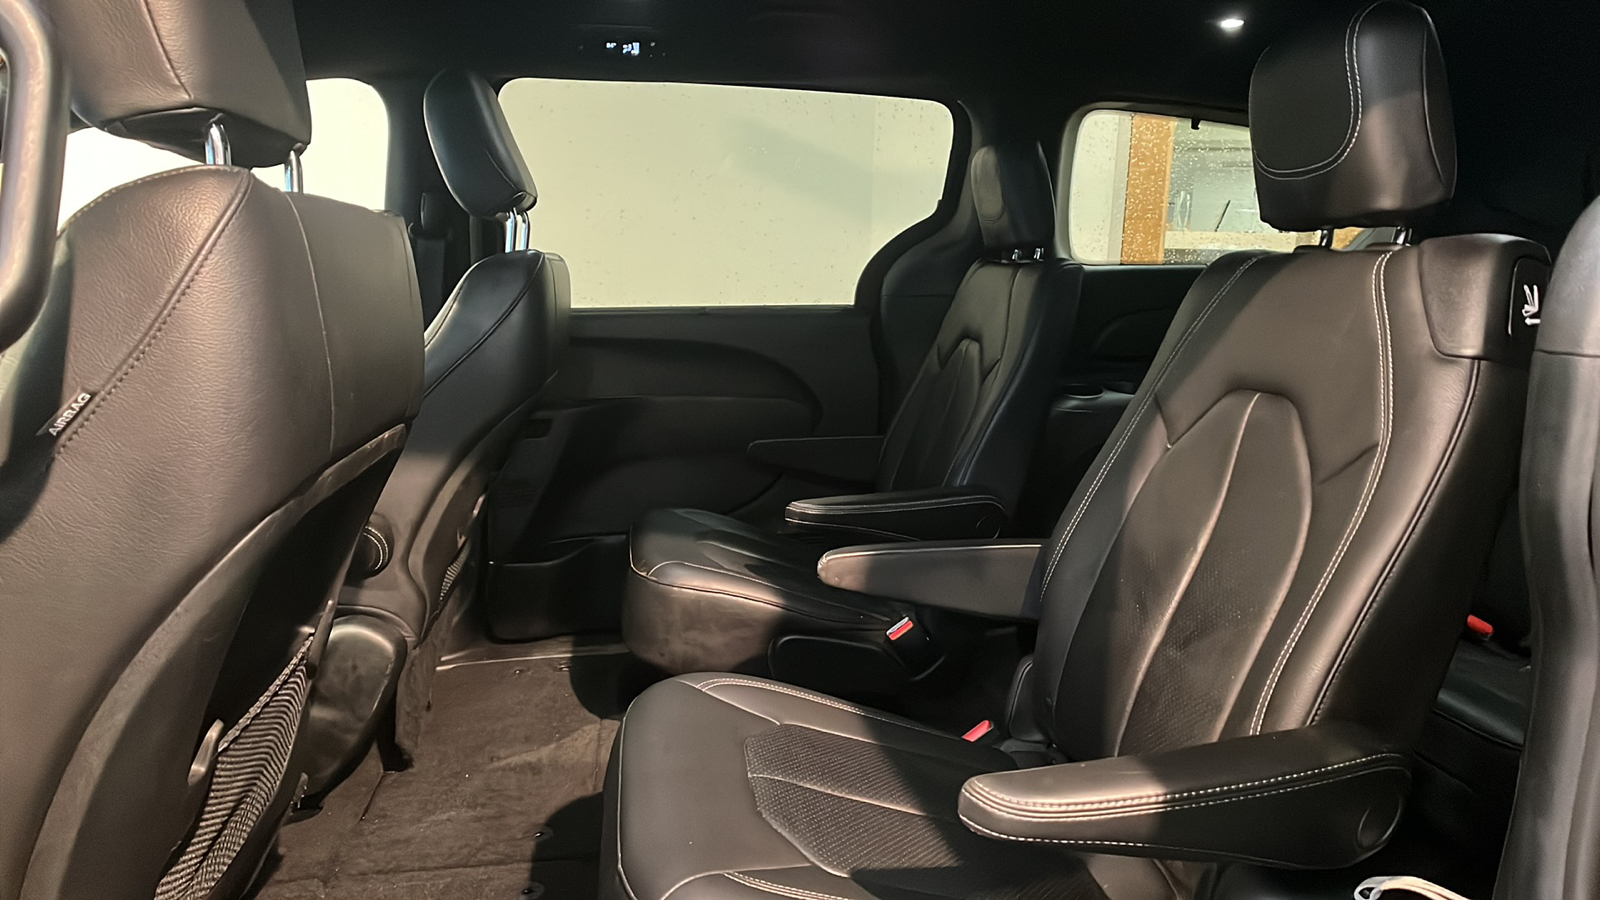 2019 Chrysler Pacifica Touring L 10